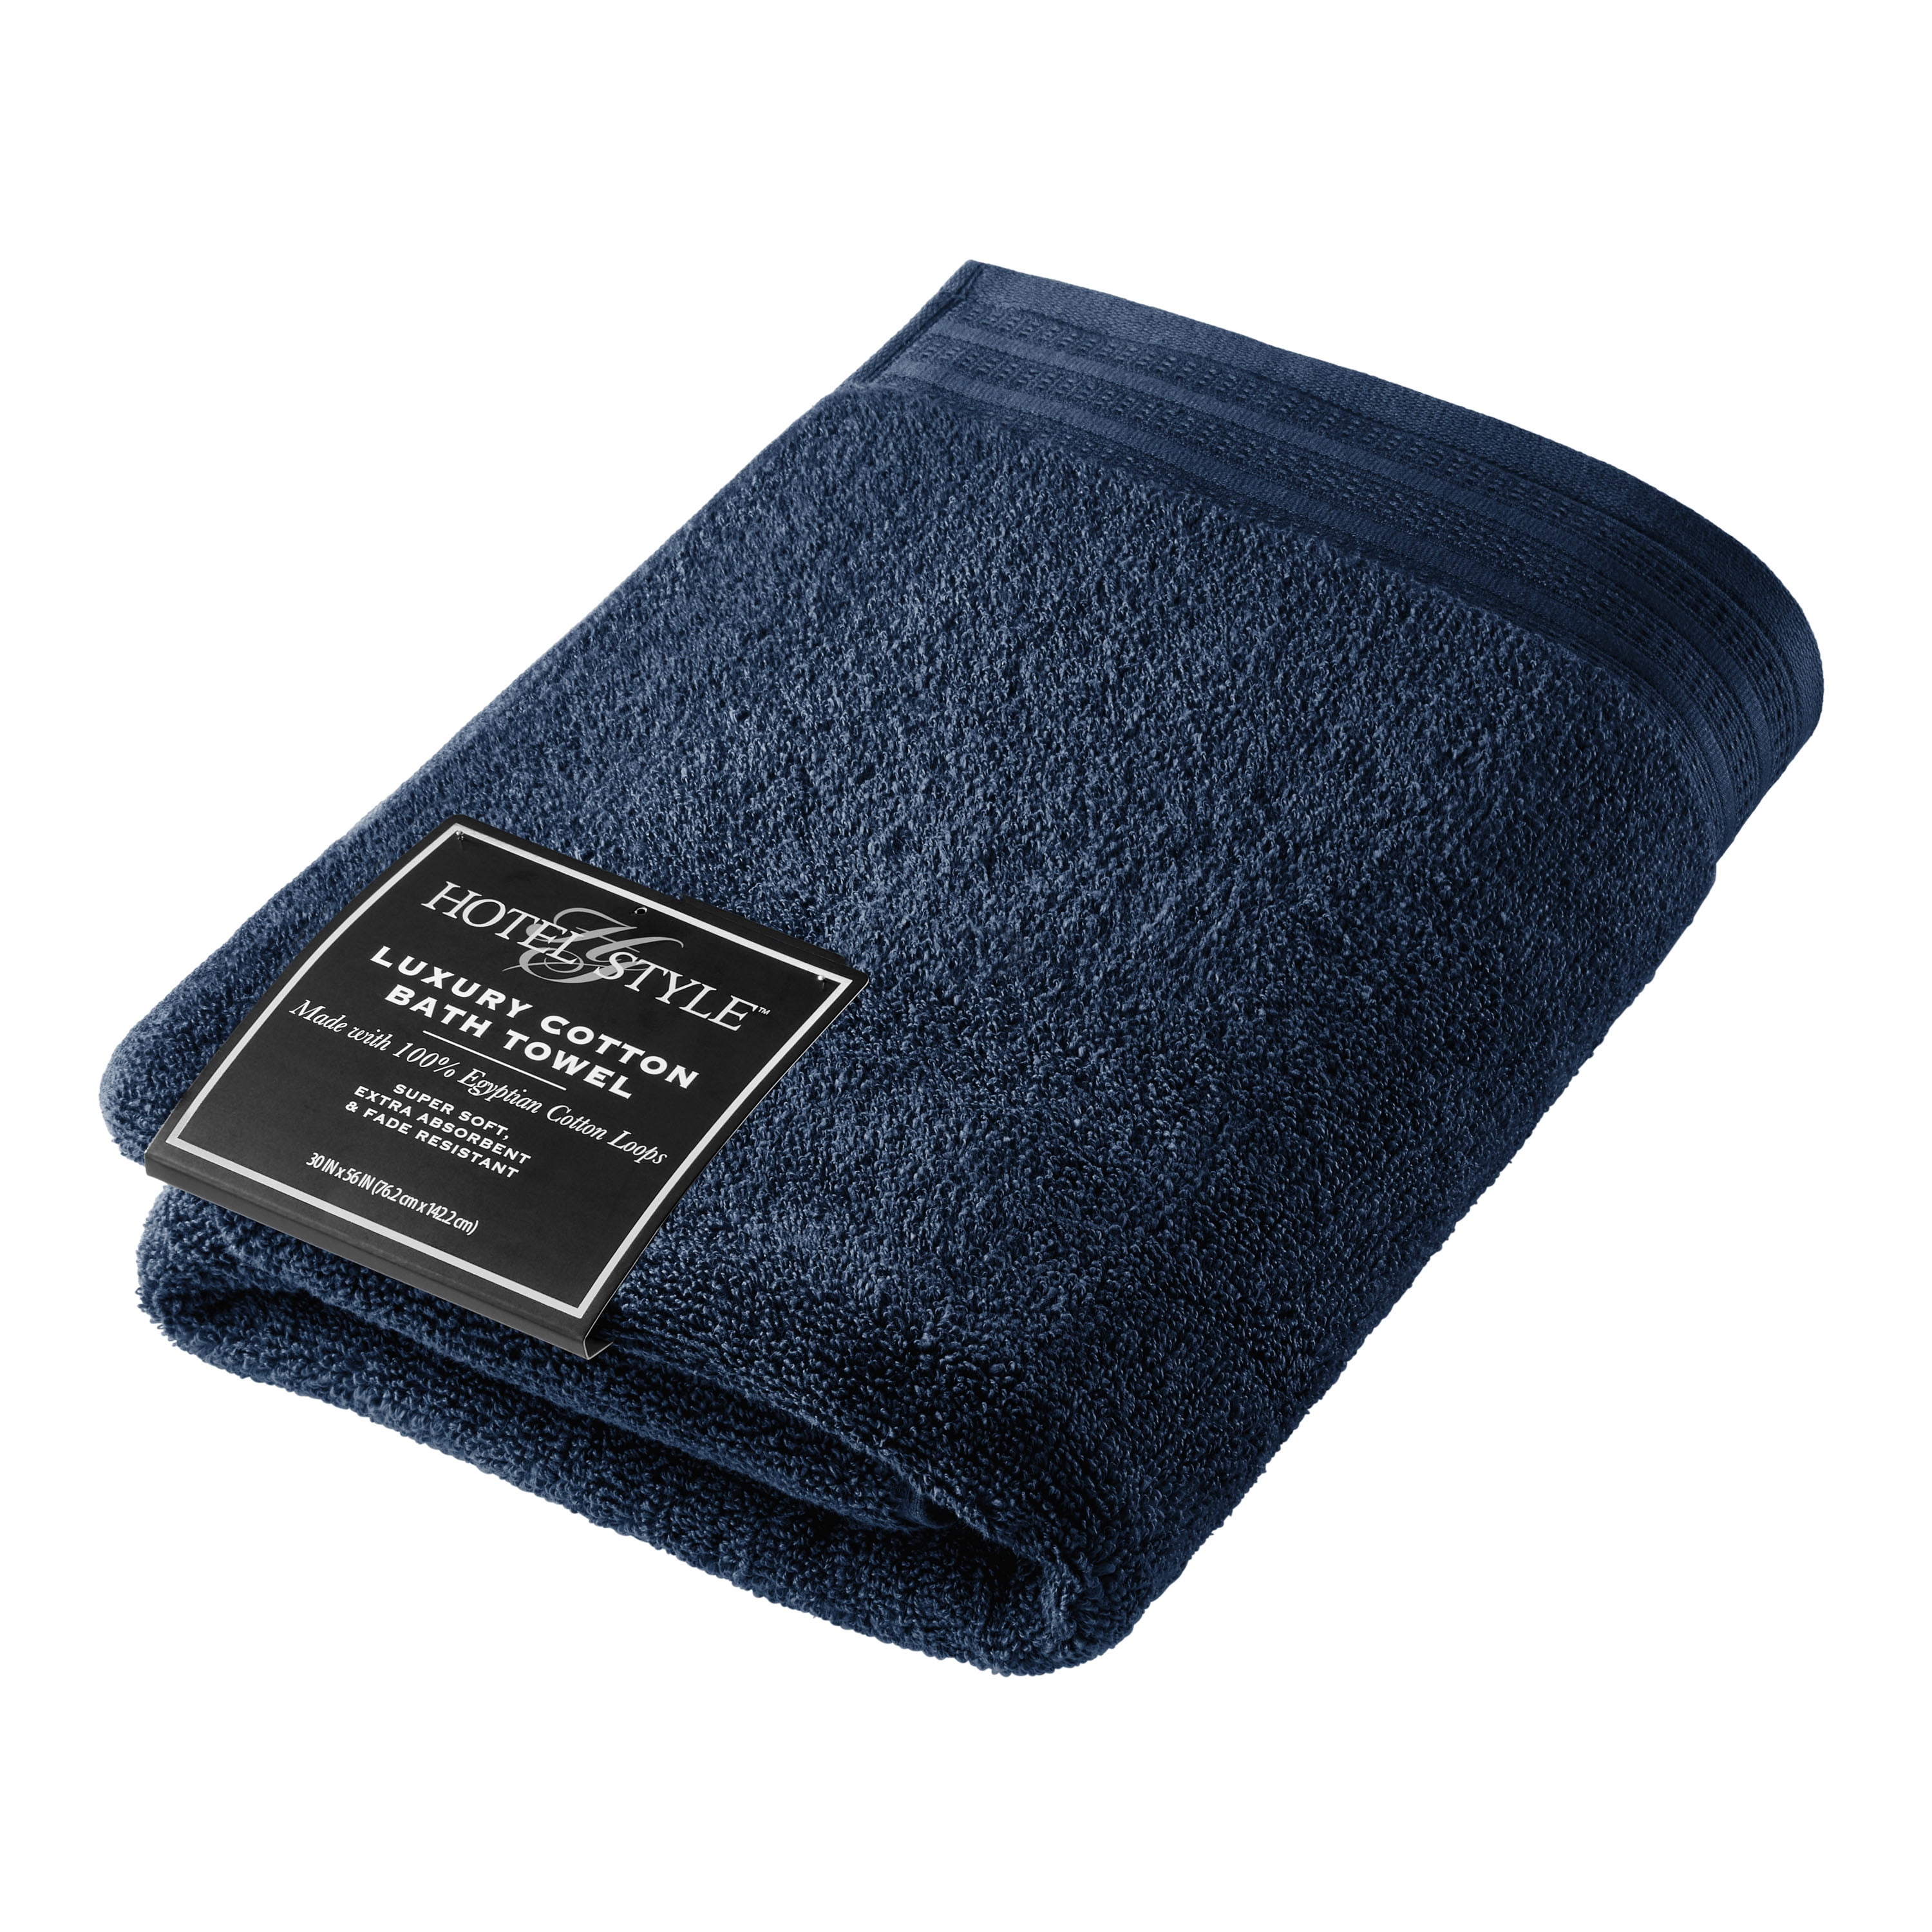 Luxury Egyptian Cotton Bath Towels for Adults,Extra Large Sauna